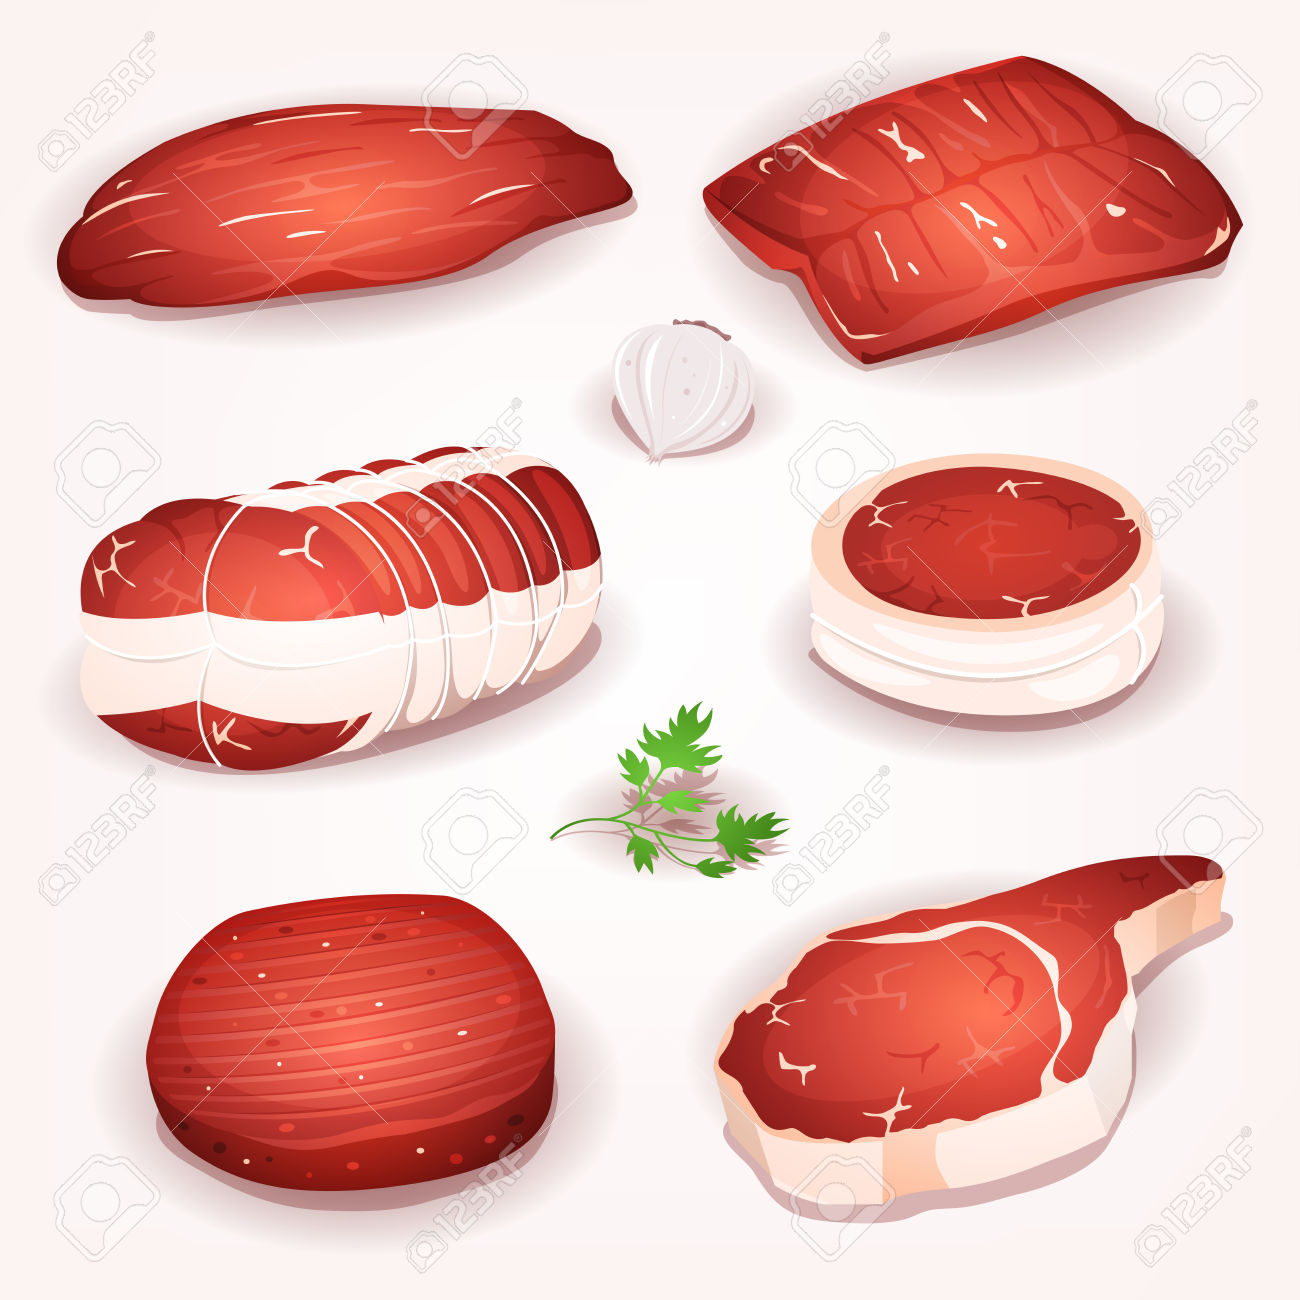 Illustration Of A Set Of Cartoon Pieces Of Raw Beef Meat, With.